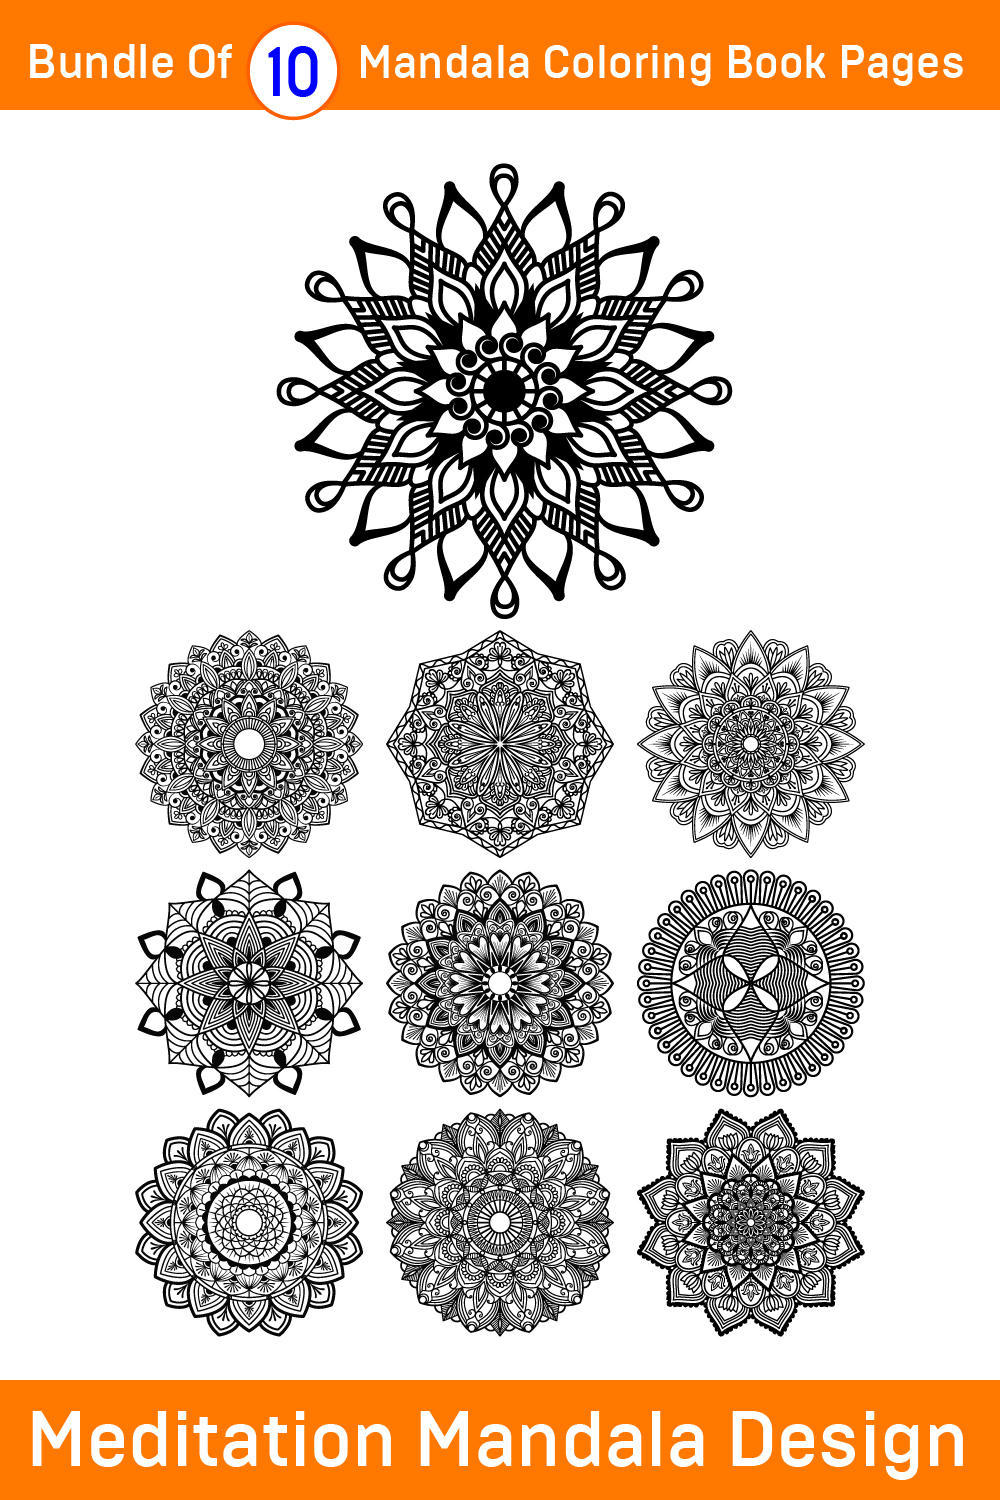 Bundle of 10 Meditation Mandala for Paper Cutting or Coloring Book Pages pinterest preview image.